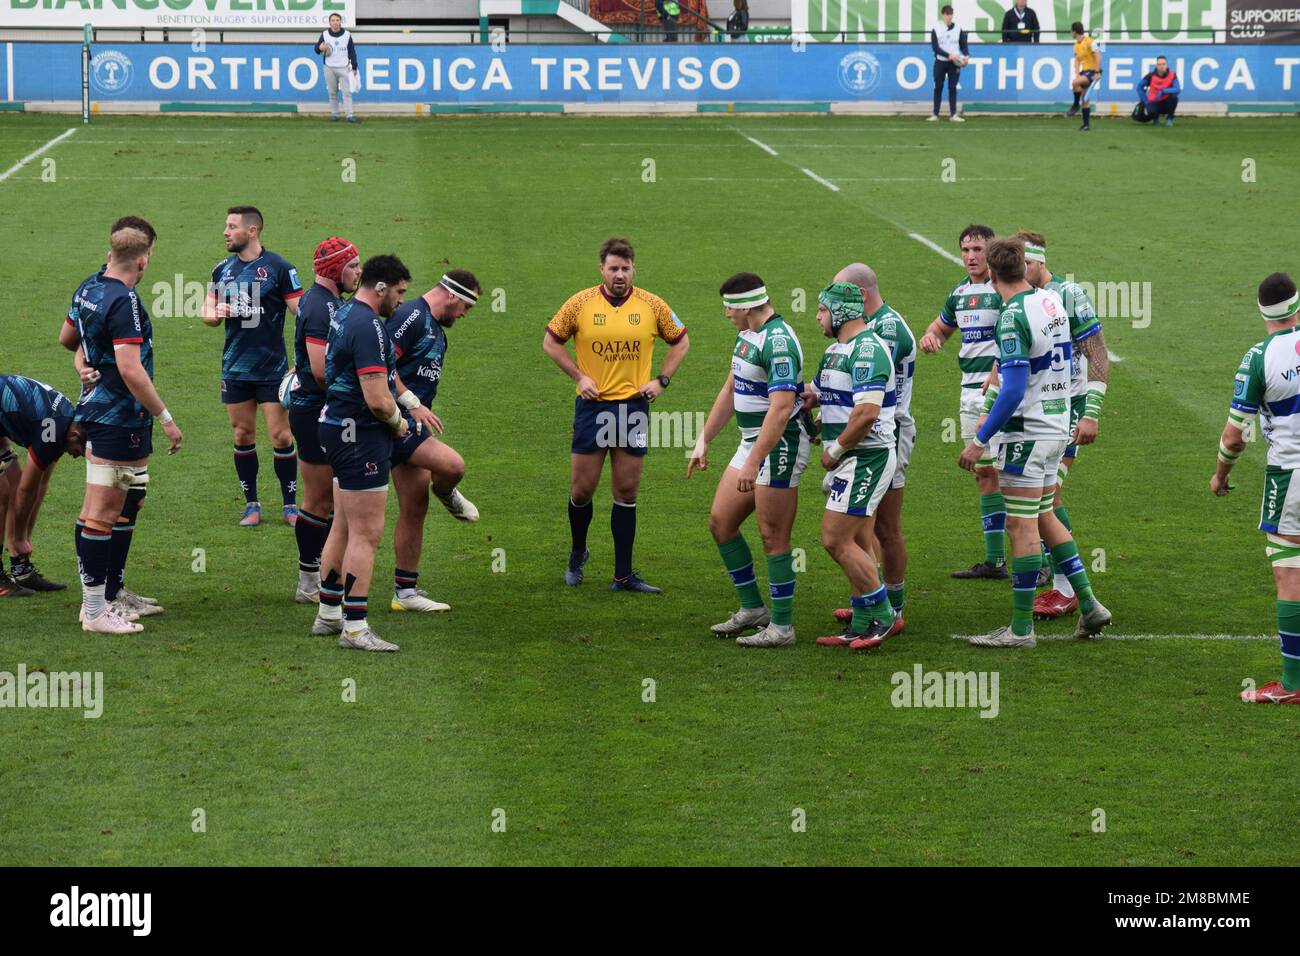 Preparing for the scrum. This was a match between Benetton rugby and Ulster rugby, played in Treviso, Italy in January 2023. Stock Photo